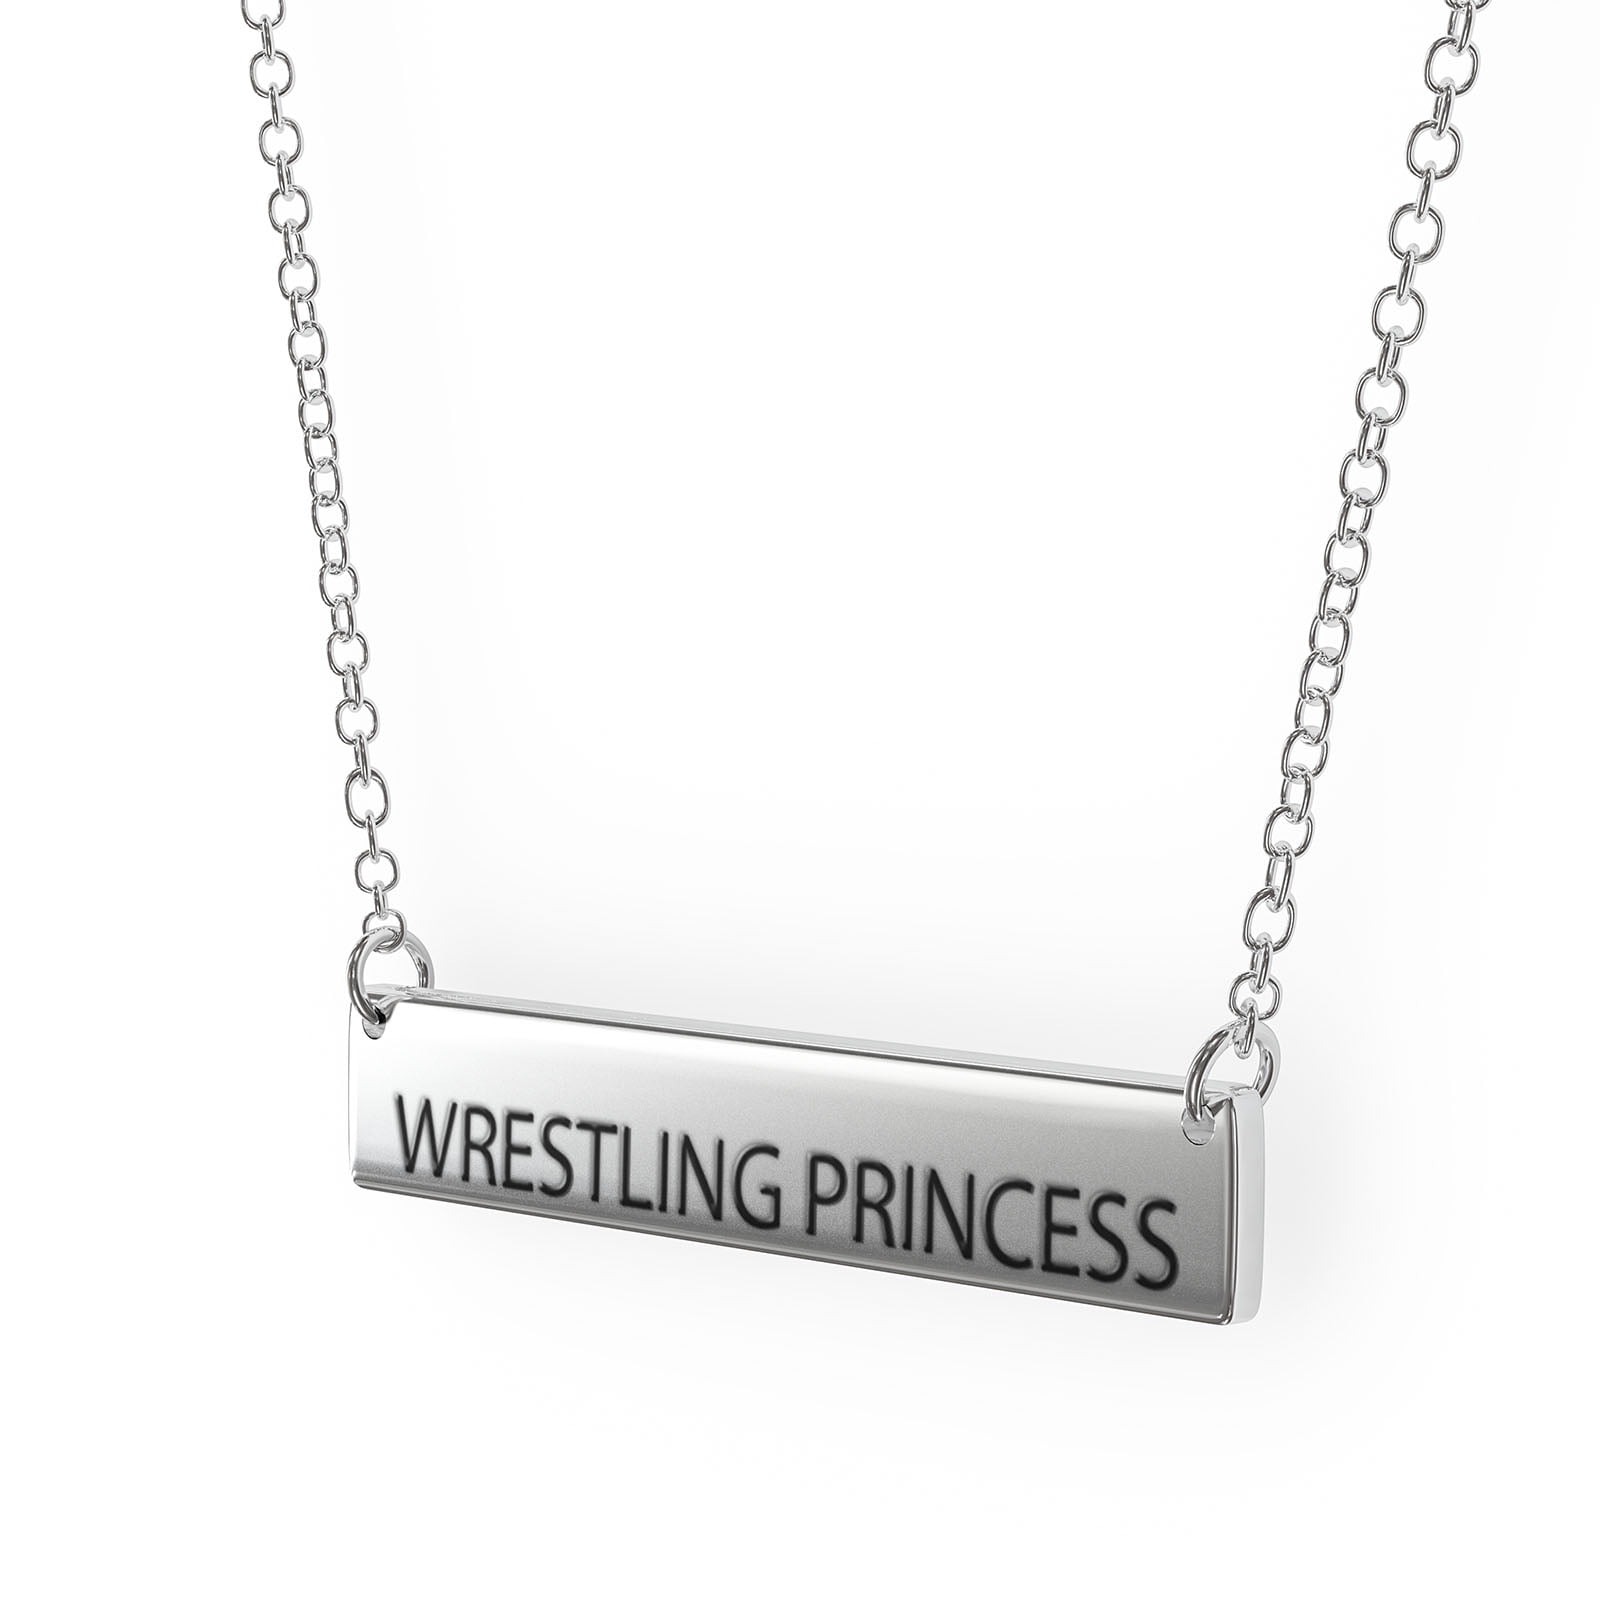 JAJAFOOK Unisex Stainless Steel Wrestling Match Pendant Sports Necklace 24 inch Chain